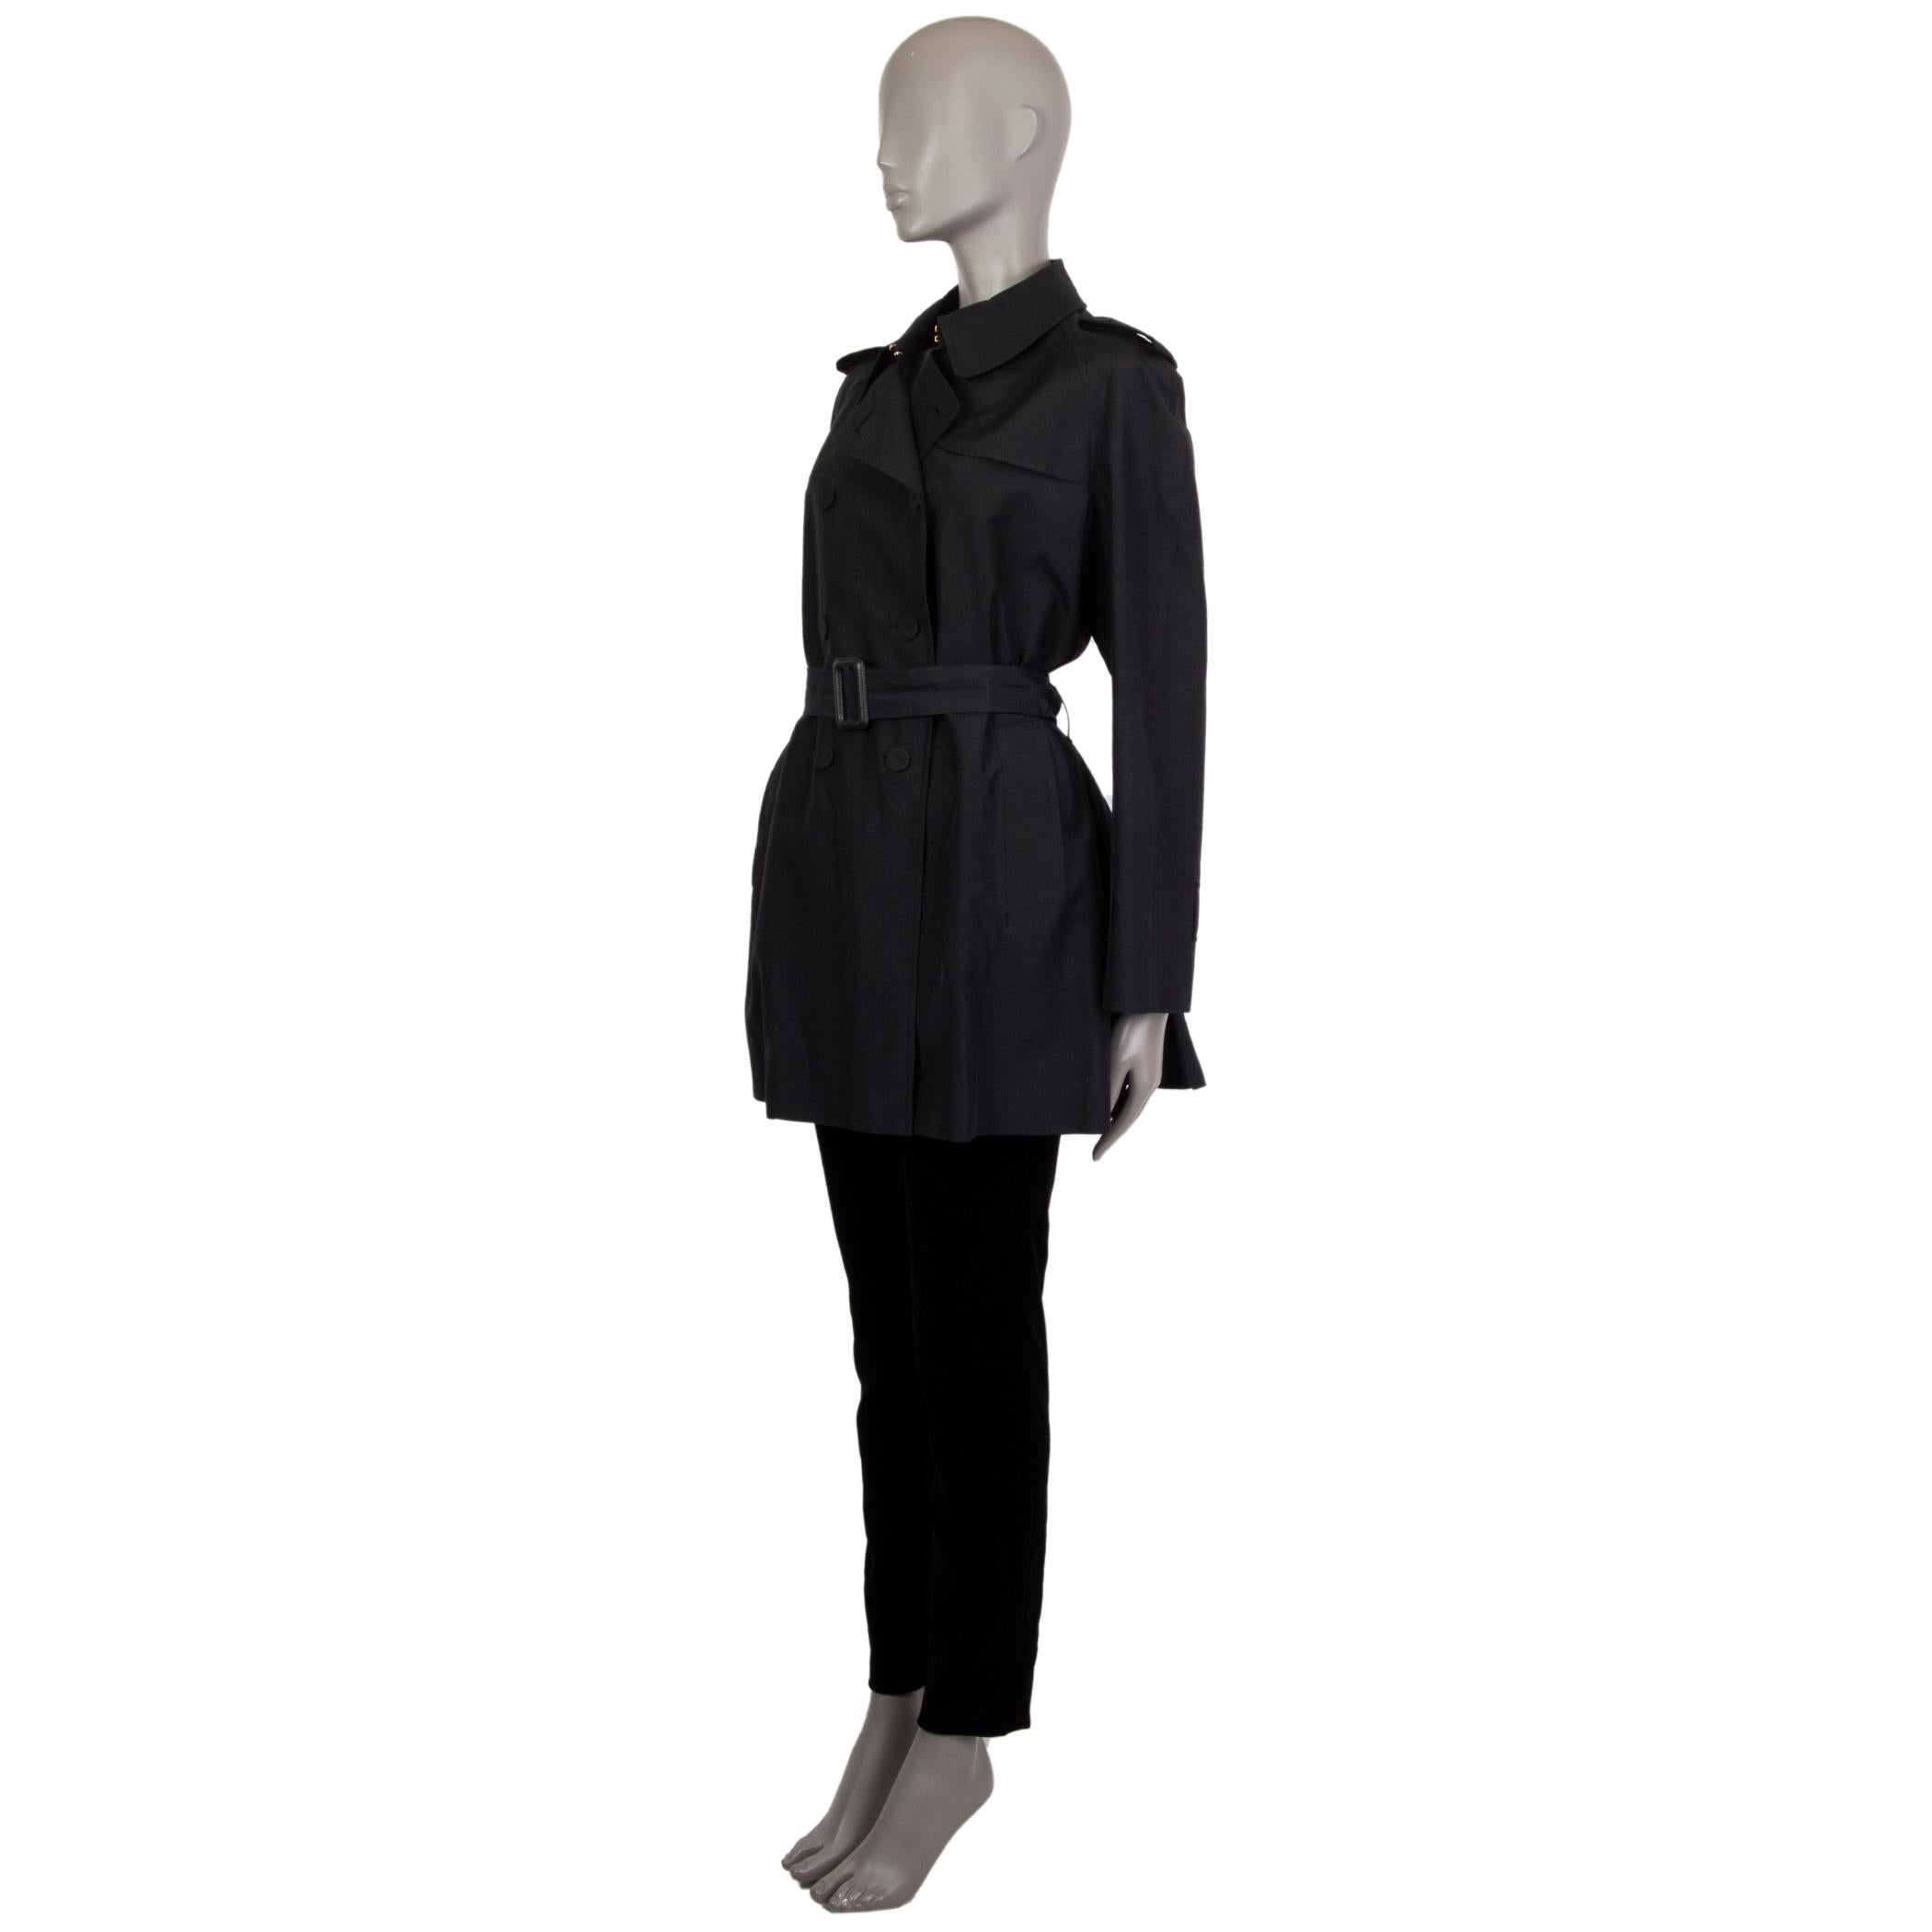 Alexander McQueen double-breasted trench coat in silk (52%) and cotton (48%). With epaulettes, storm flap on the left chest, box-pleated flap on the back, belt loops around the waist and cuffs, belted cuffs, two pockets on the sides, and pleated